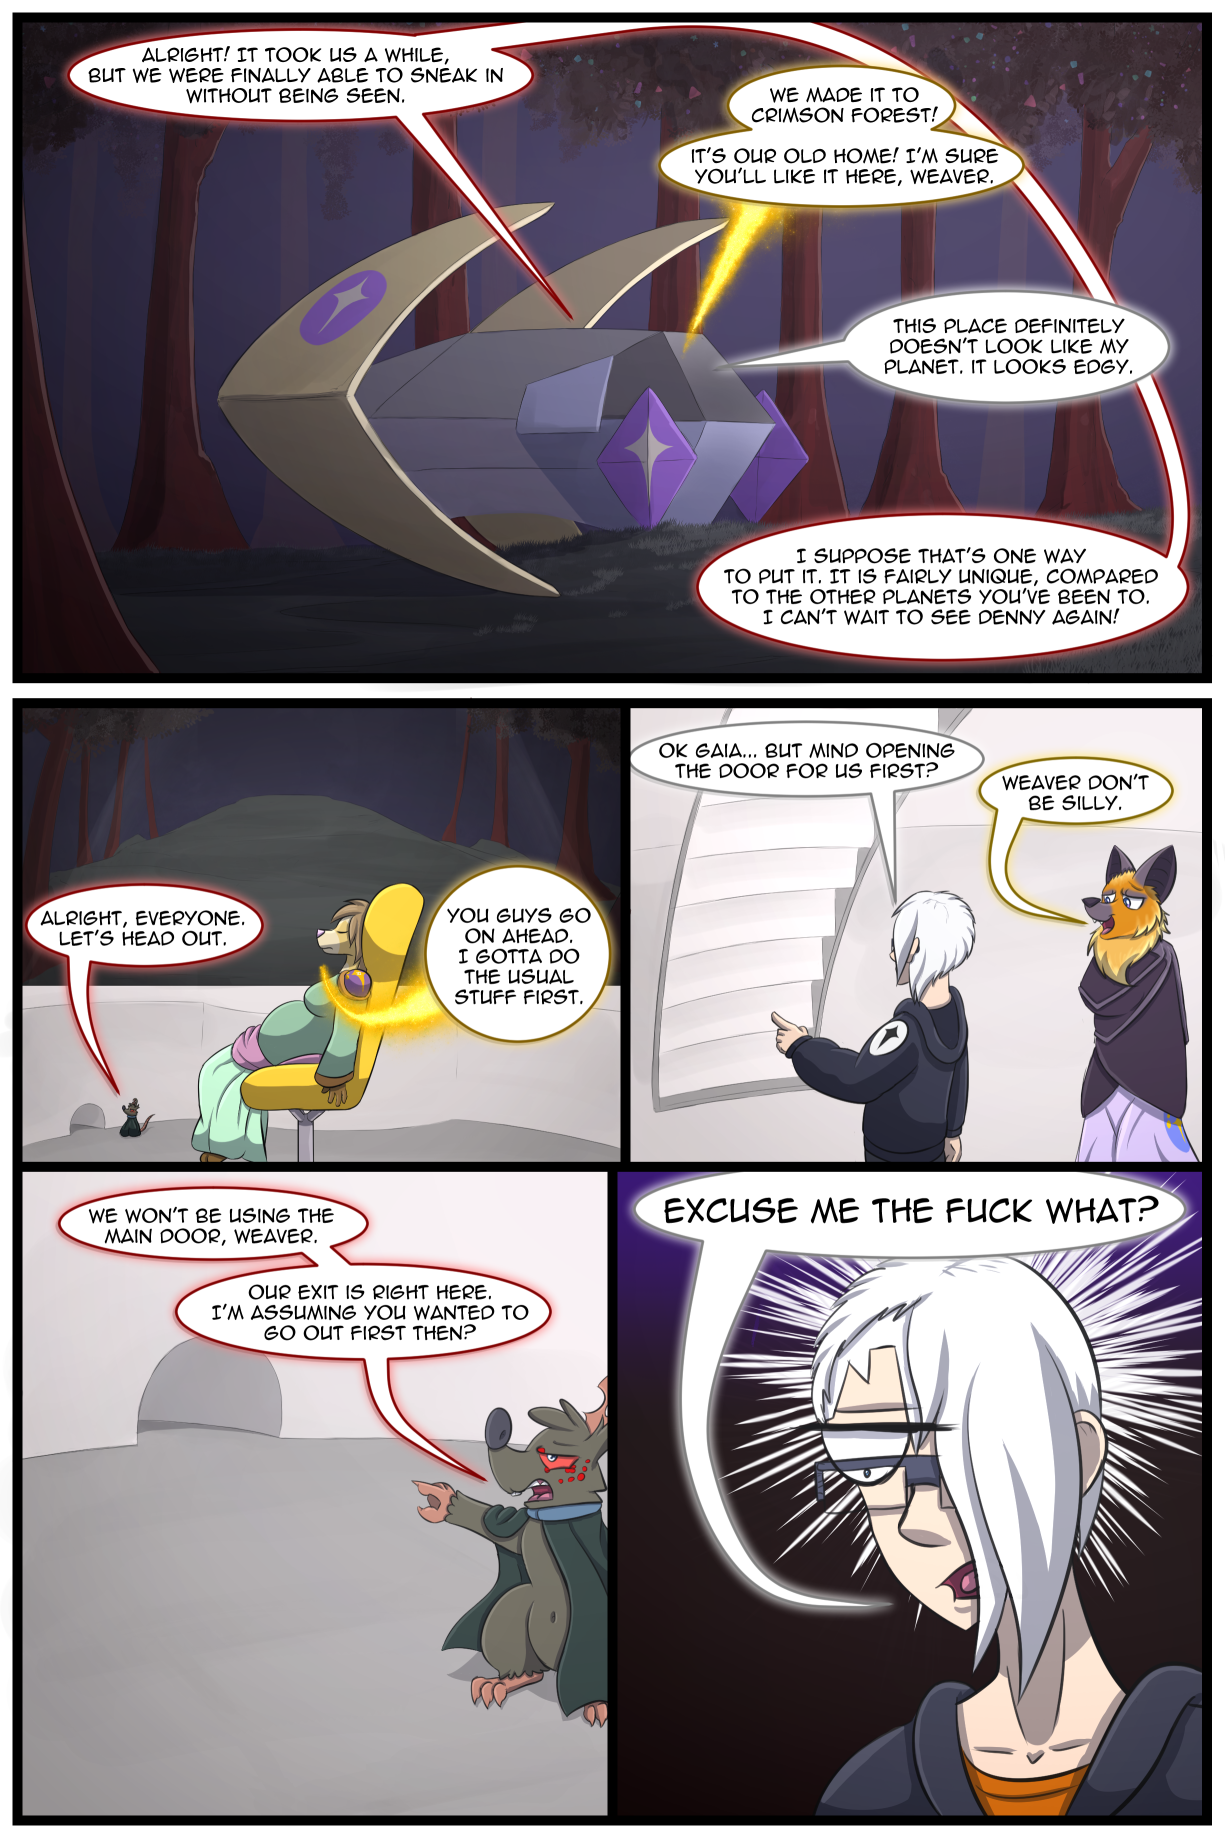 Ch5 Page 1 – Hole